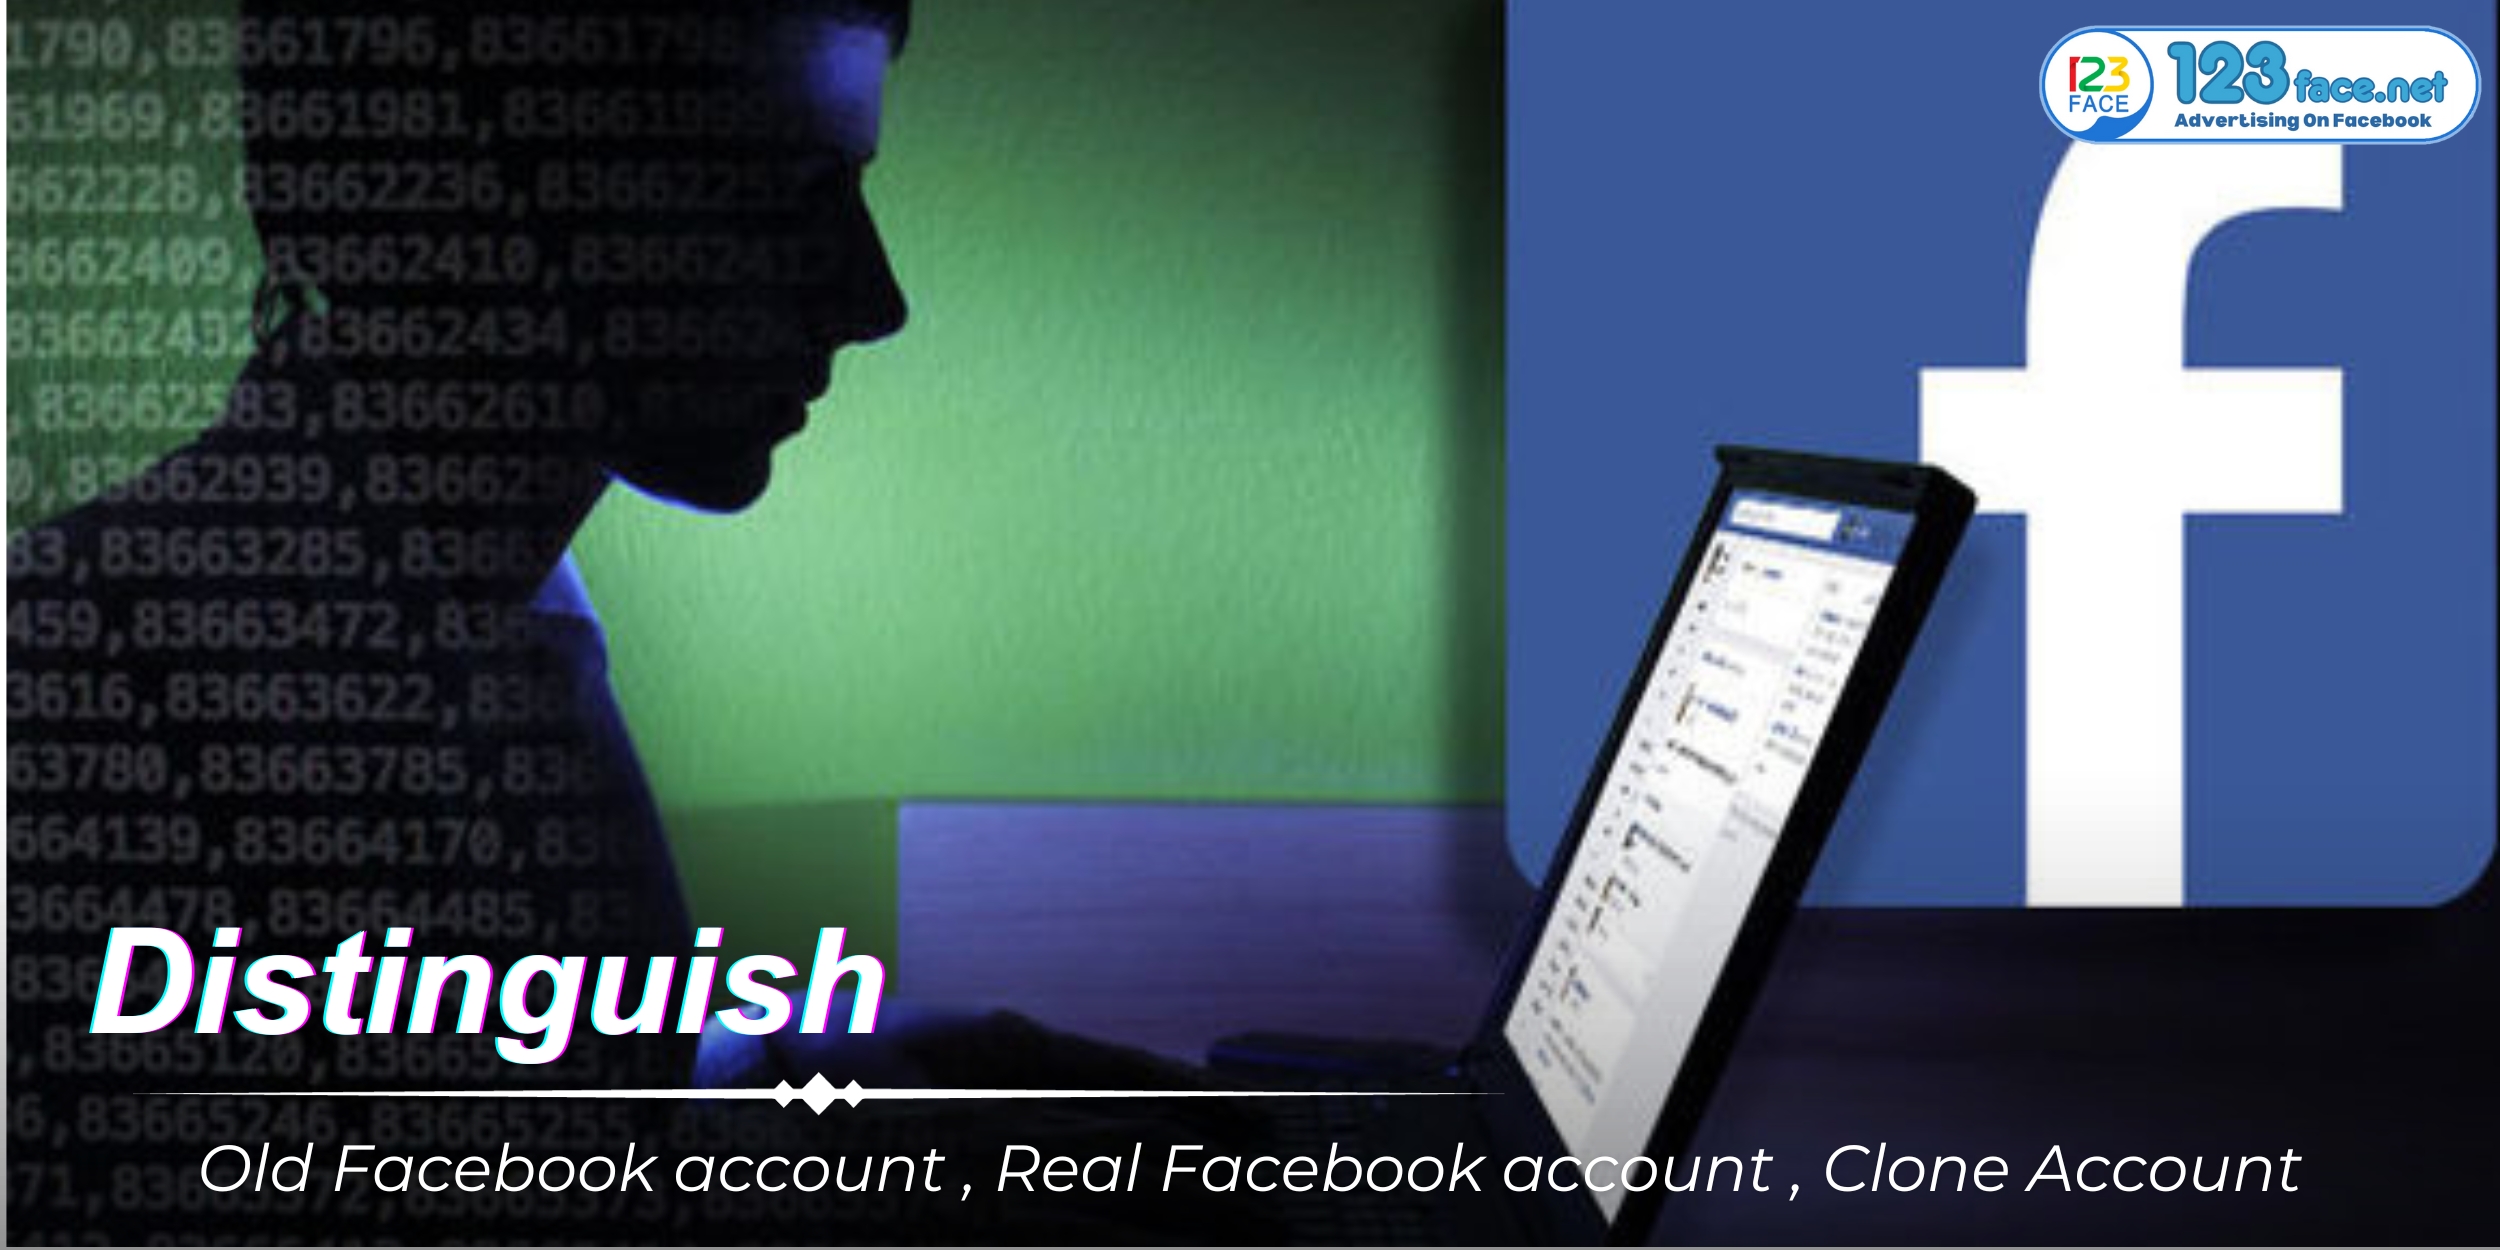 How is an account called? Old Facebook, Real Facebook, Clone account